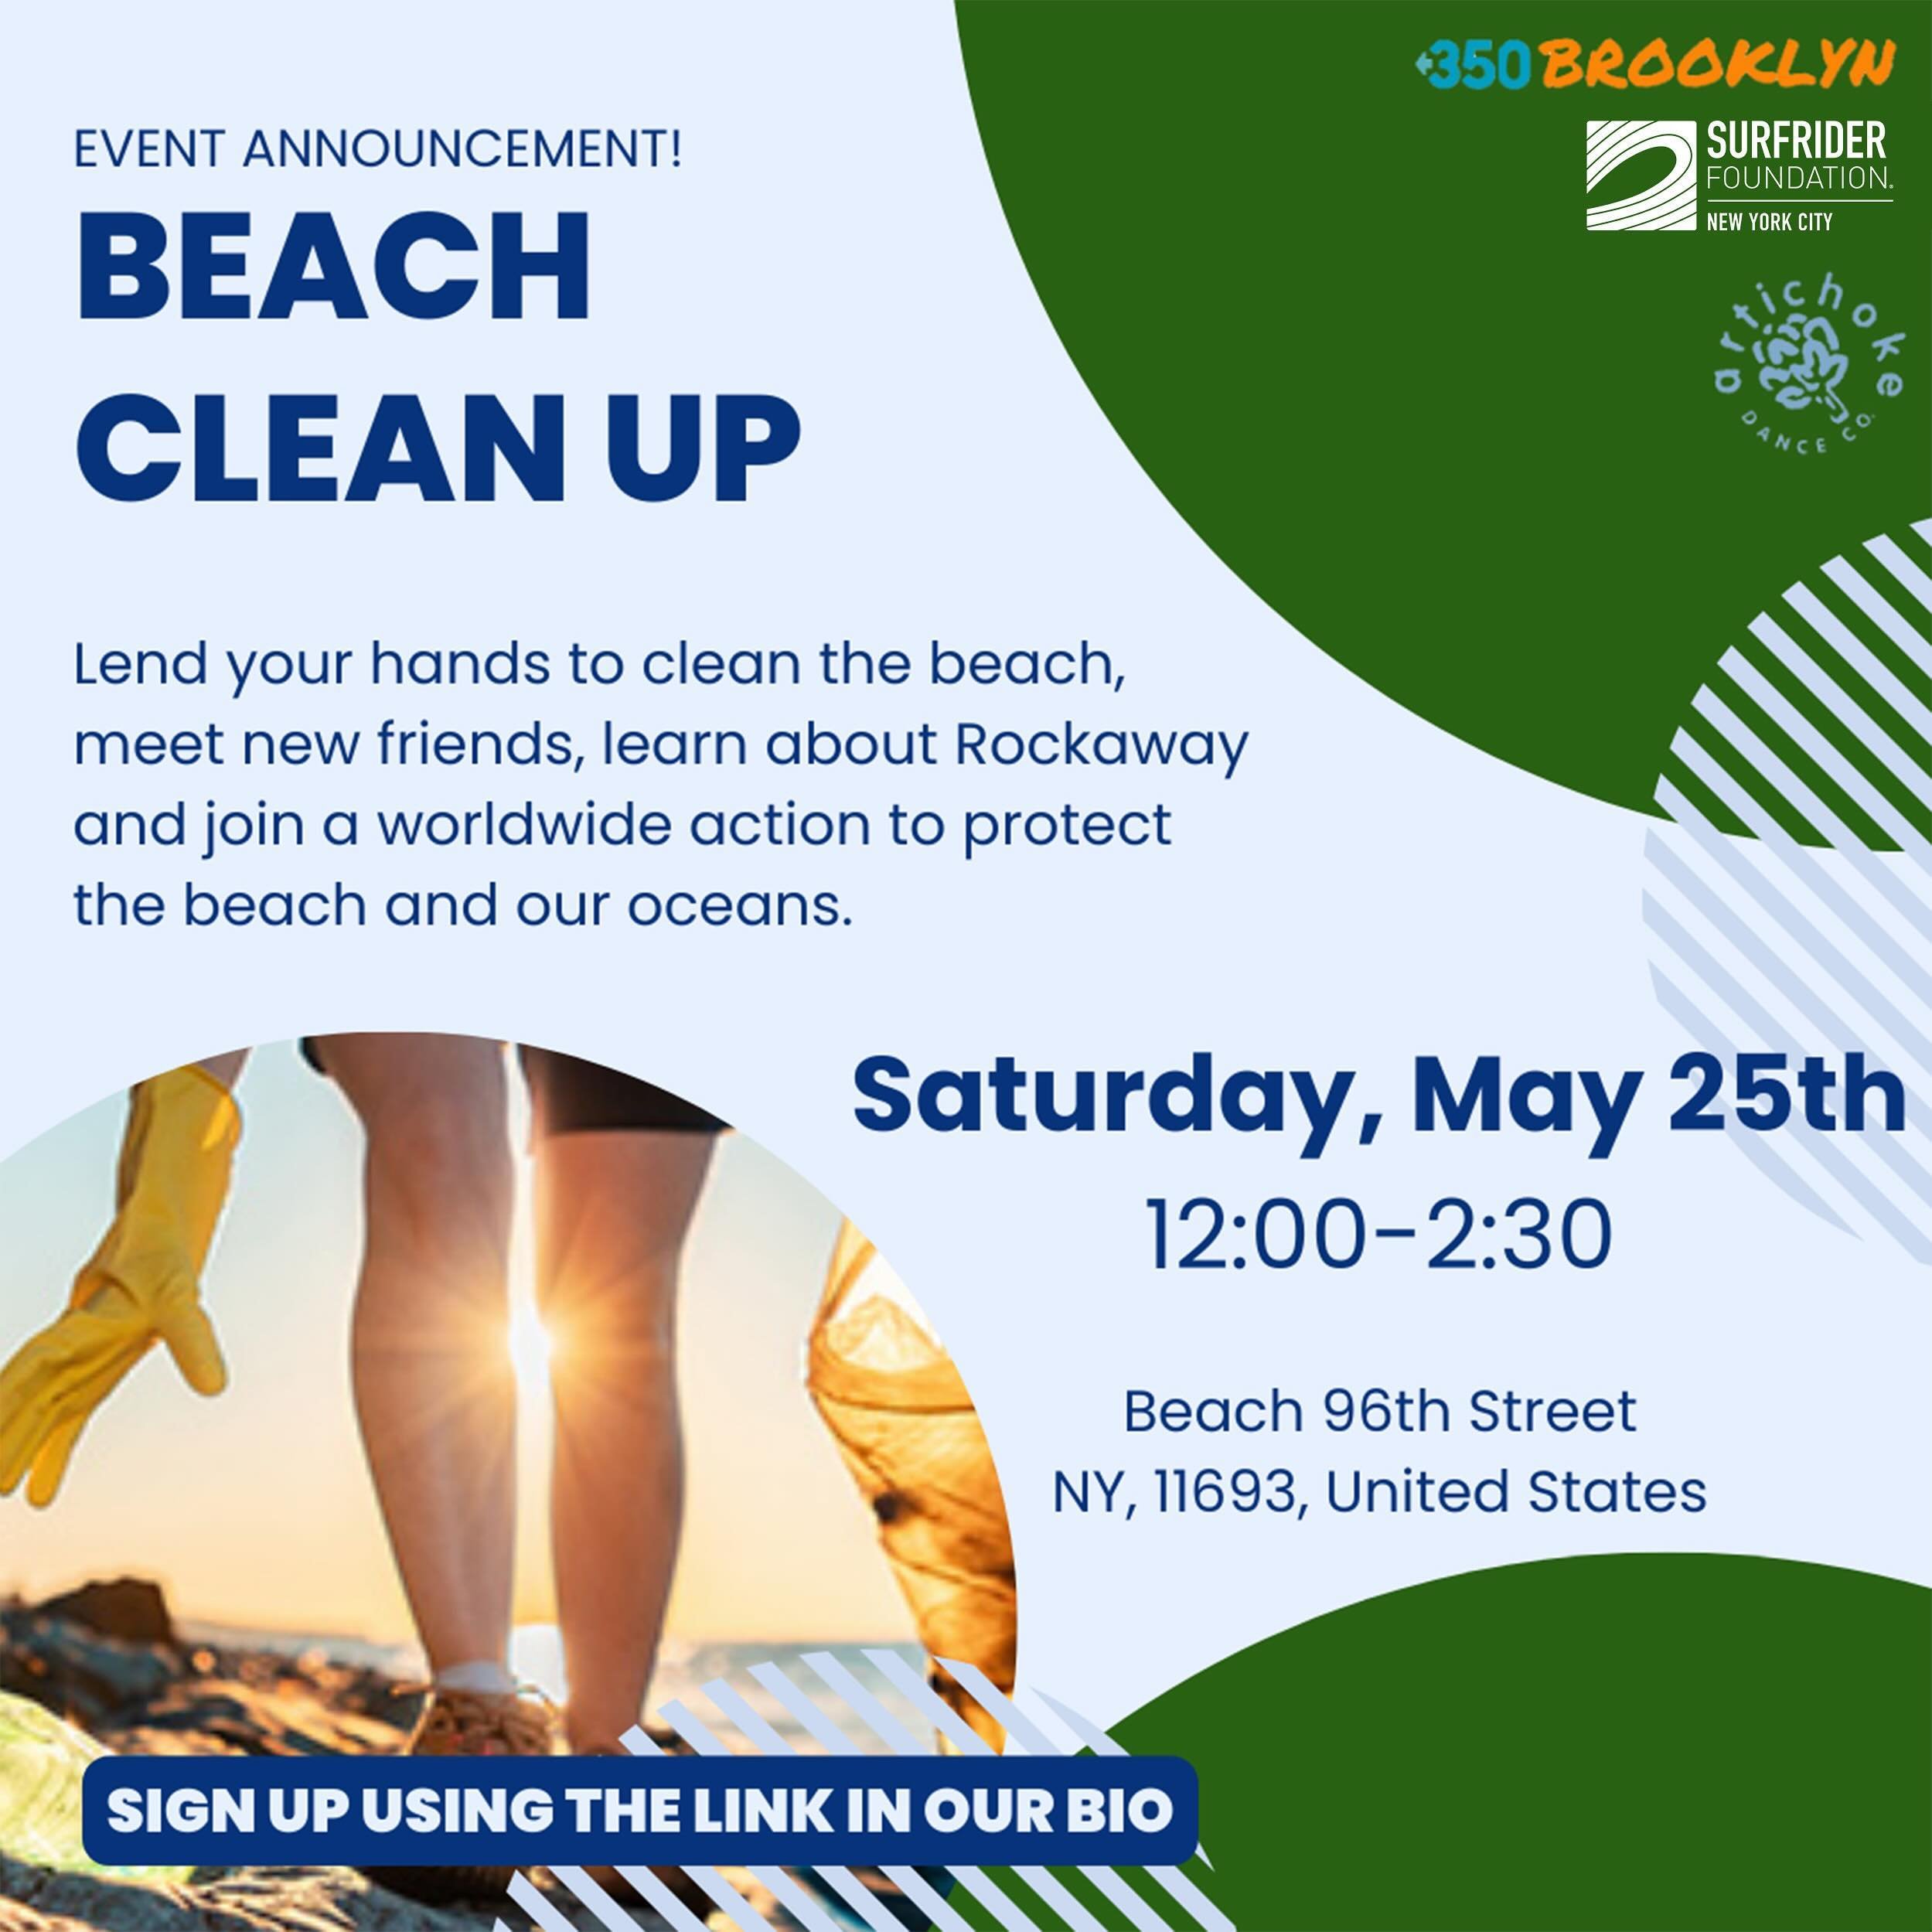 We are so excited to announce our first event from our Perils of Plastic series in partnership with 350Brooklyn and SurfriderNYC! ☀️🏝️

🌎Join us at Rockaway Beach at 96th St. from 12pm to 2:30pm on Saturday May 25th to give a hand in picking up tra